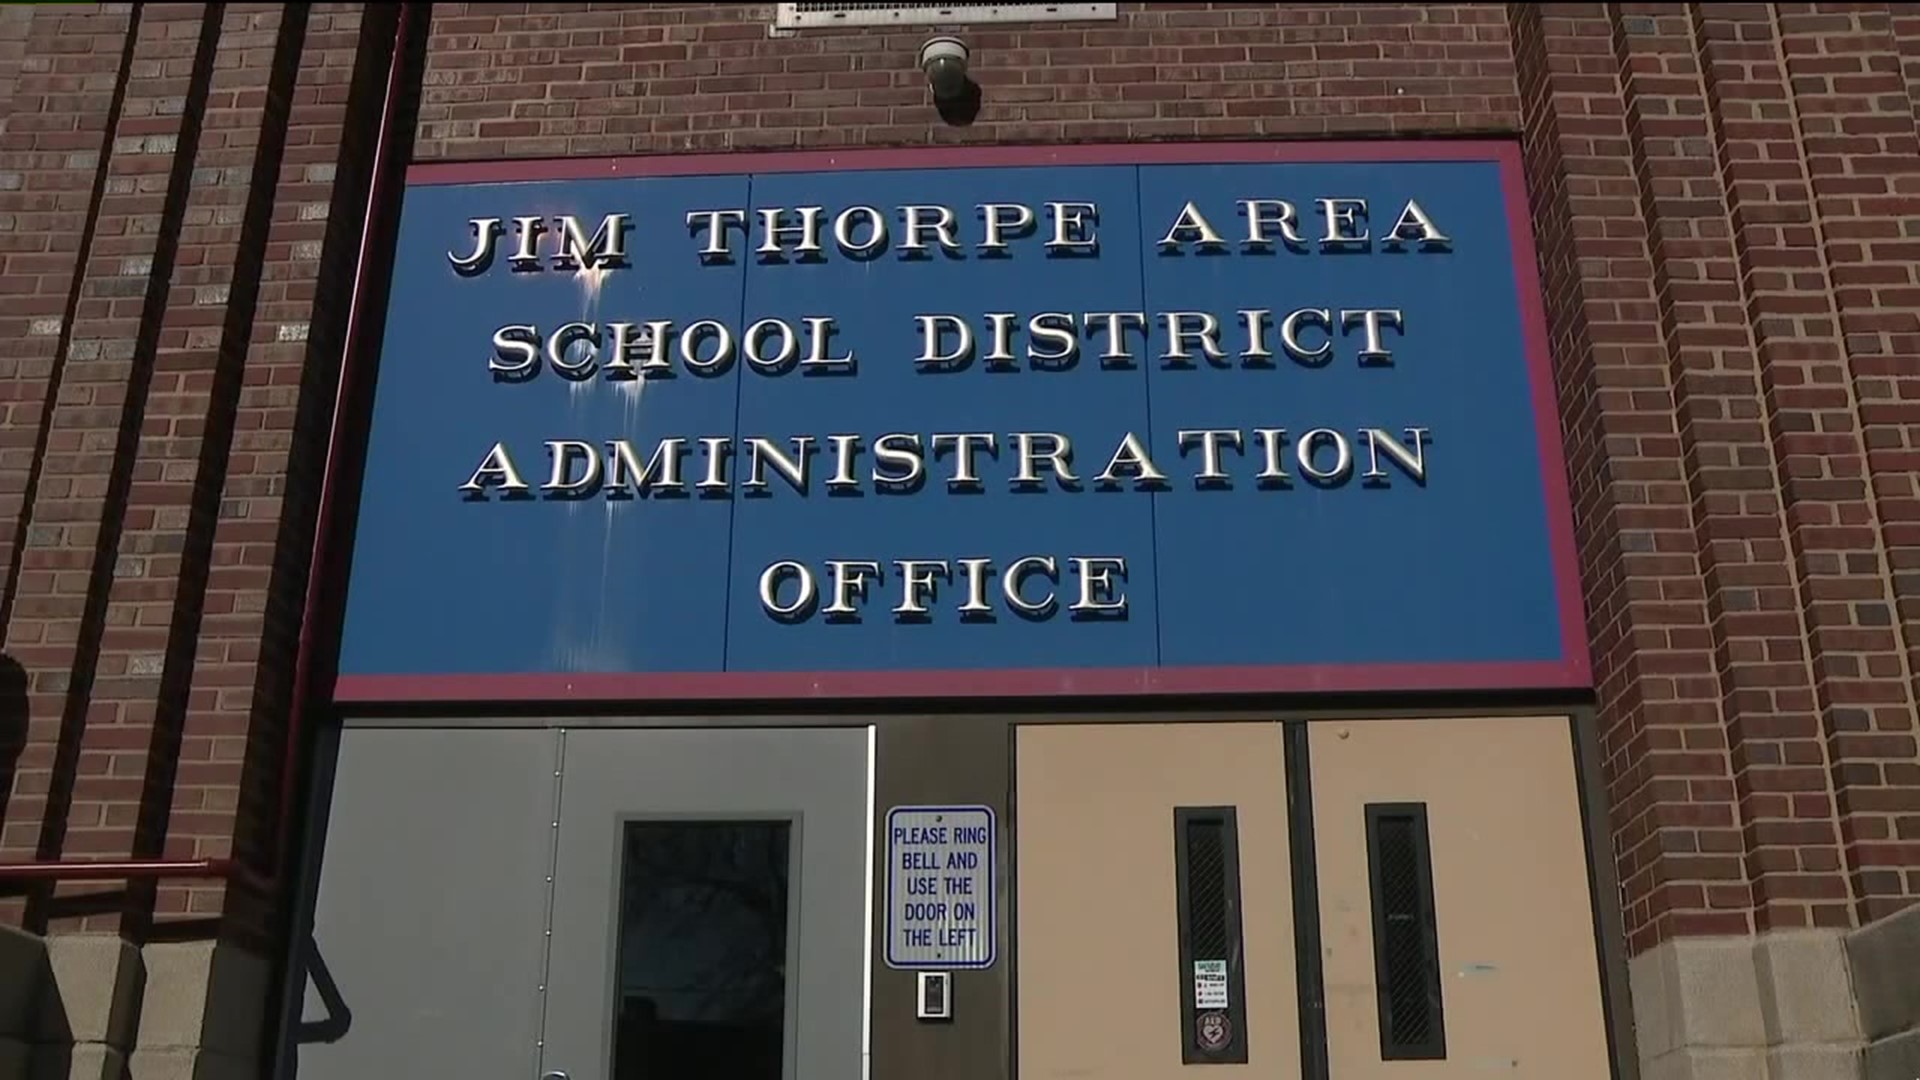 Jim Thorpe Area School District officials planned for school to be out for the rest of the year. Students started learning online this week.